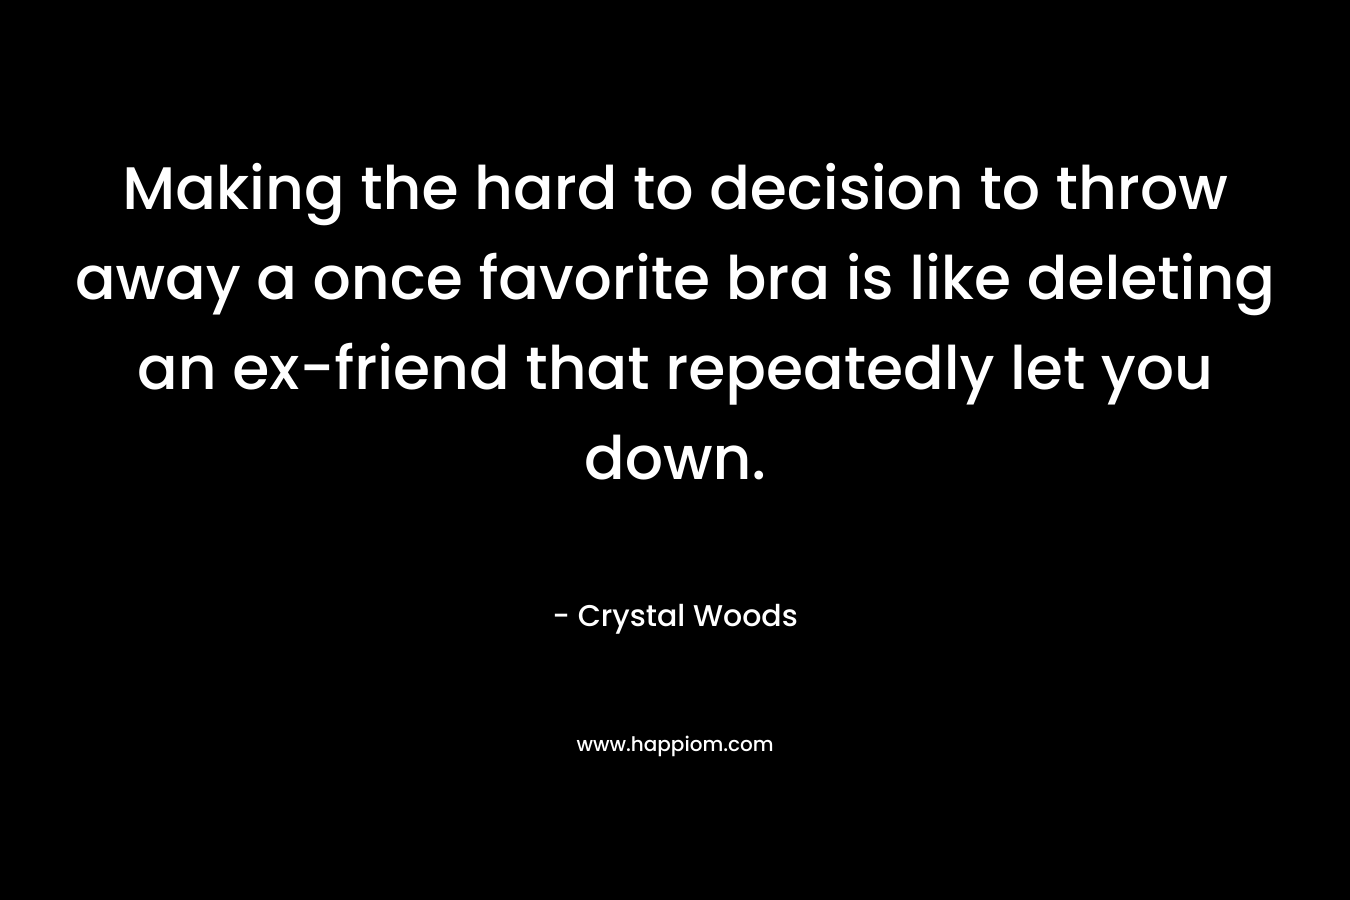 Making the hard to decision to throw away a once favorite bra is like deleting an ex-friend that repeatedly let you down. – Crystal Woods